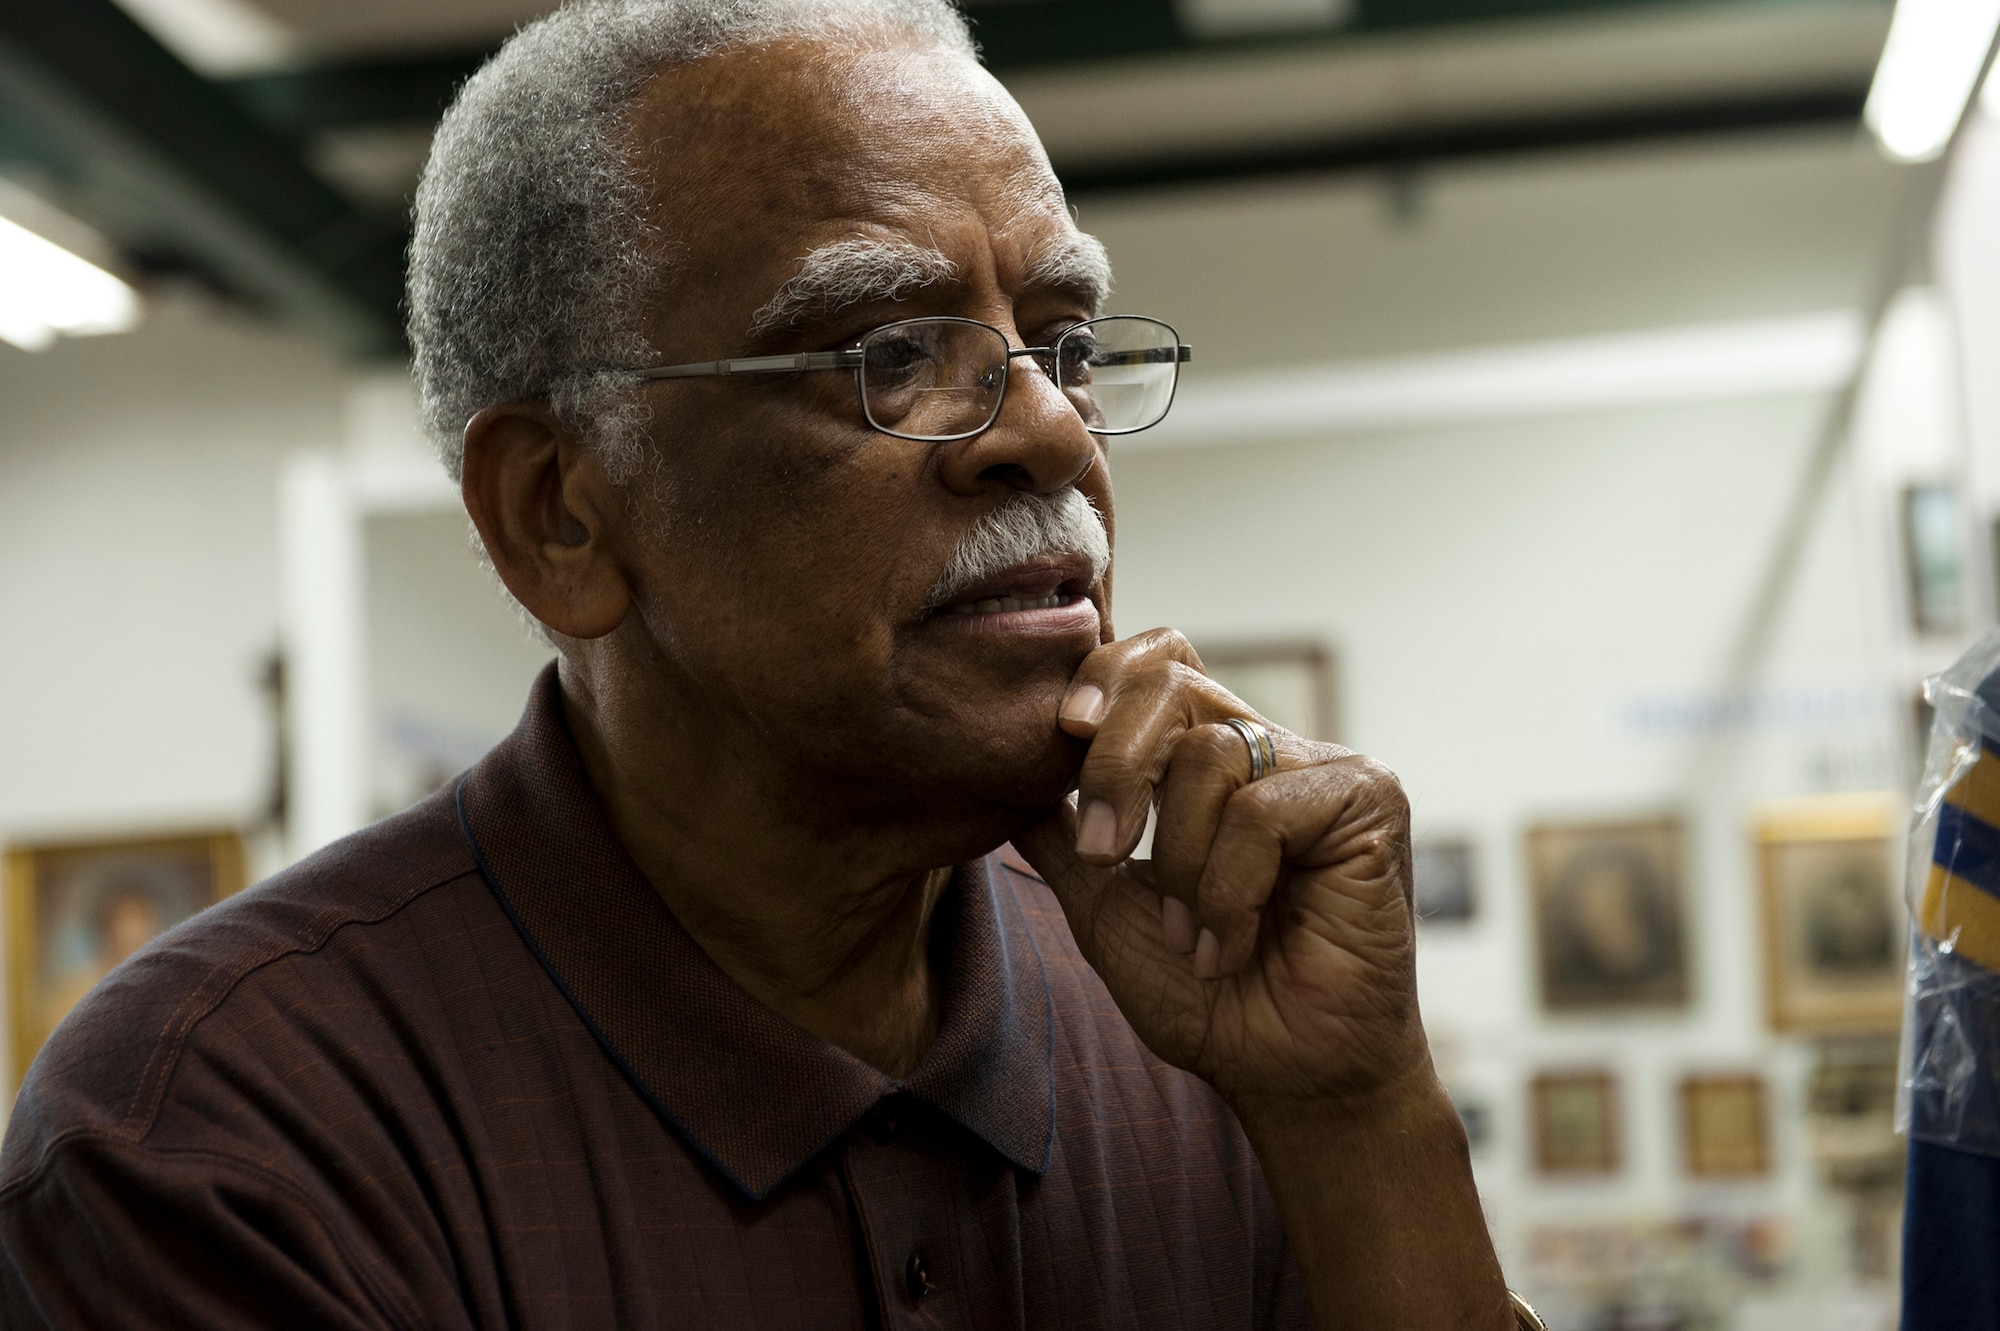 Retired U.S. Air Force Chief Master Sgt. James “Jack” Hadley, Black History Museum curator, reminisces on his childhood, Feb. 8, 2016, in Thomasville, Ga. Hadley grew up at Pebble Hill, a former Thomasville cotton plantation, before enlisting in the Air Force and serving his country for 28 years. (U.S. Air Force photo by Airman 1st Class Kathleen D. Bryant/Released)
